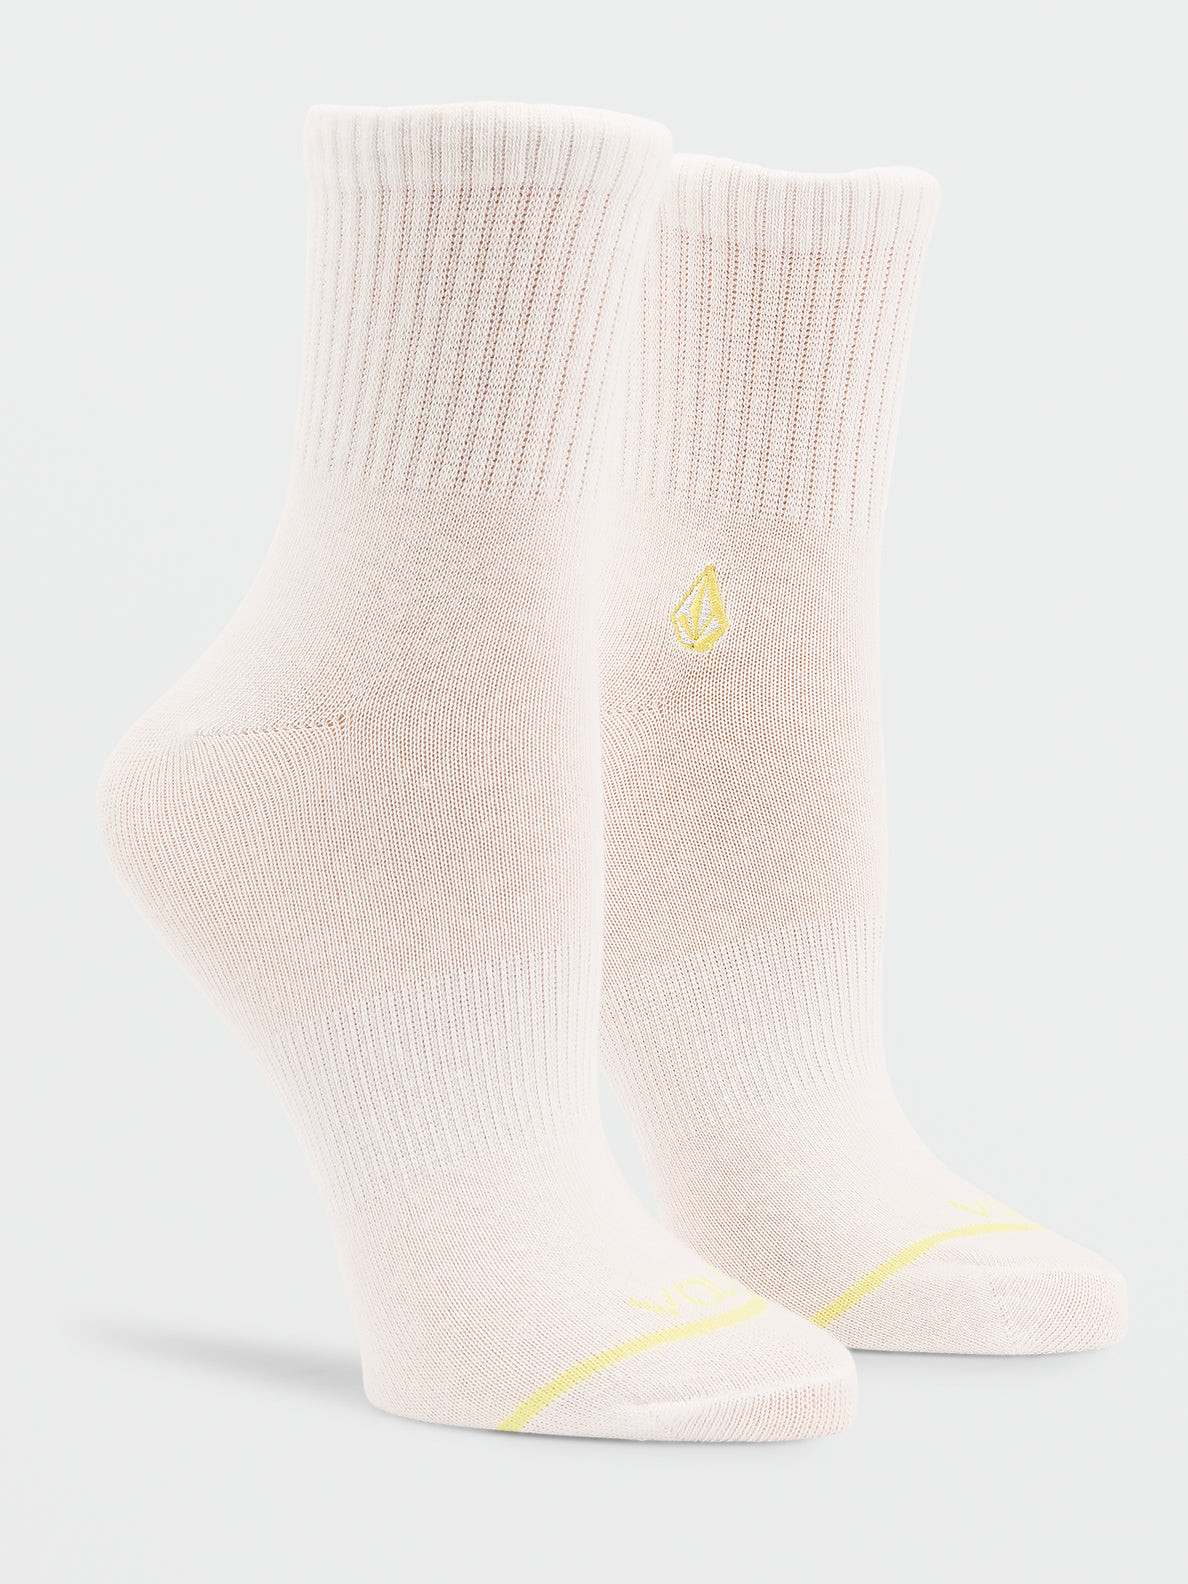 The New Crew Socks 3 Pack - Assorted Colors (E6332200_AST) [2]